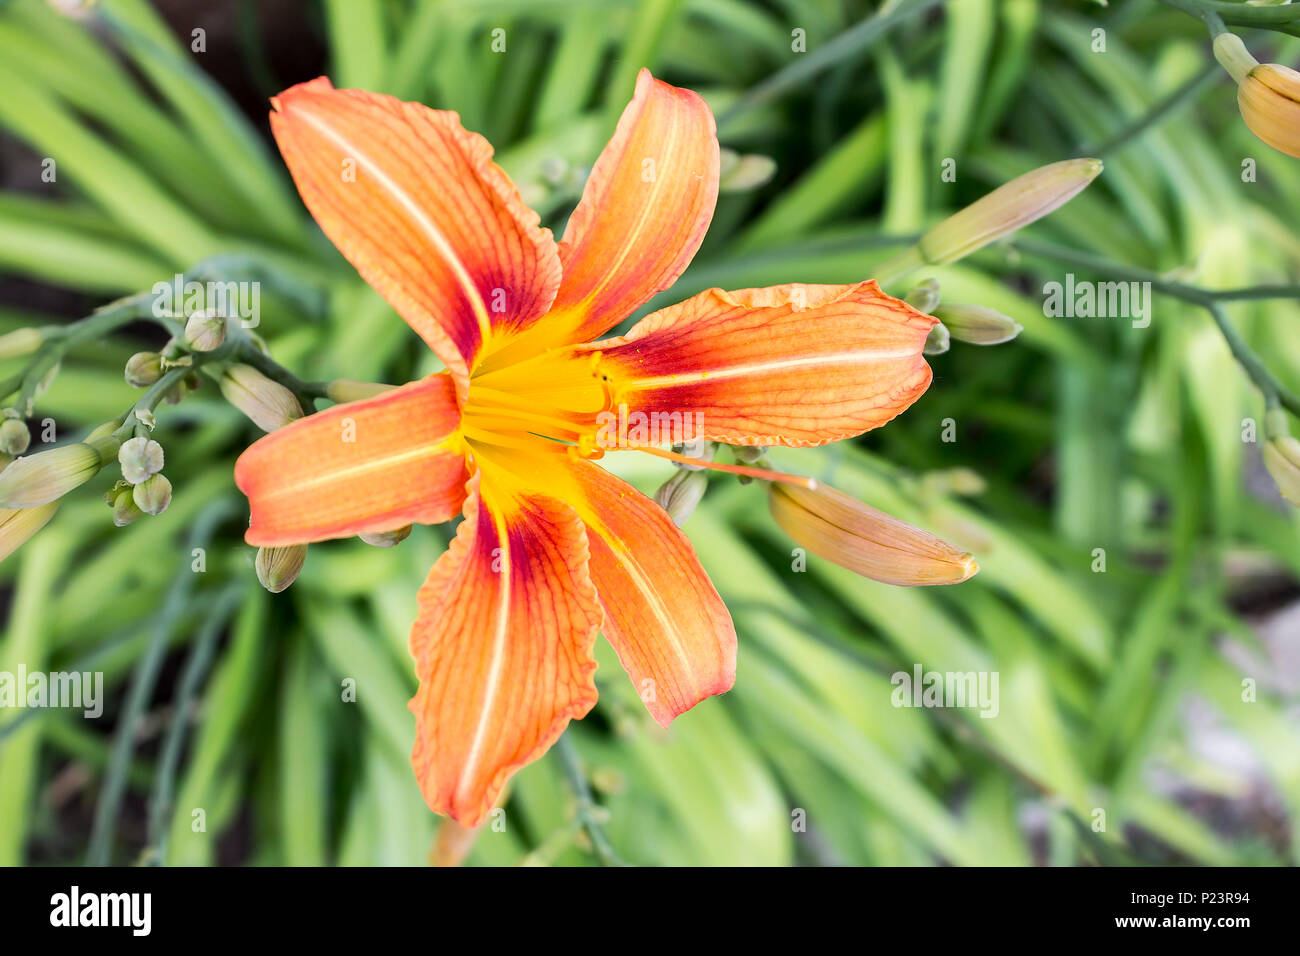 Photo of exotic flower of orange lilie on bright green tropical foliage nature background. Close-up view Stock Photo